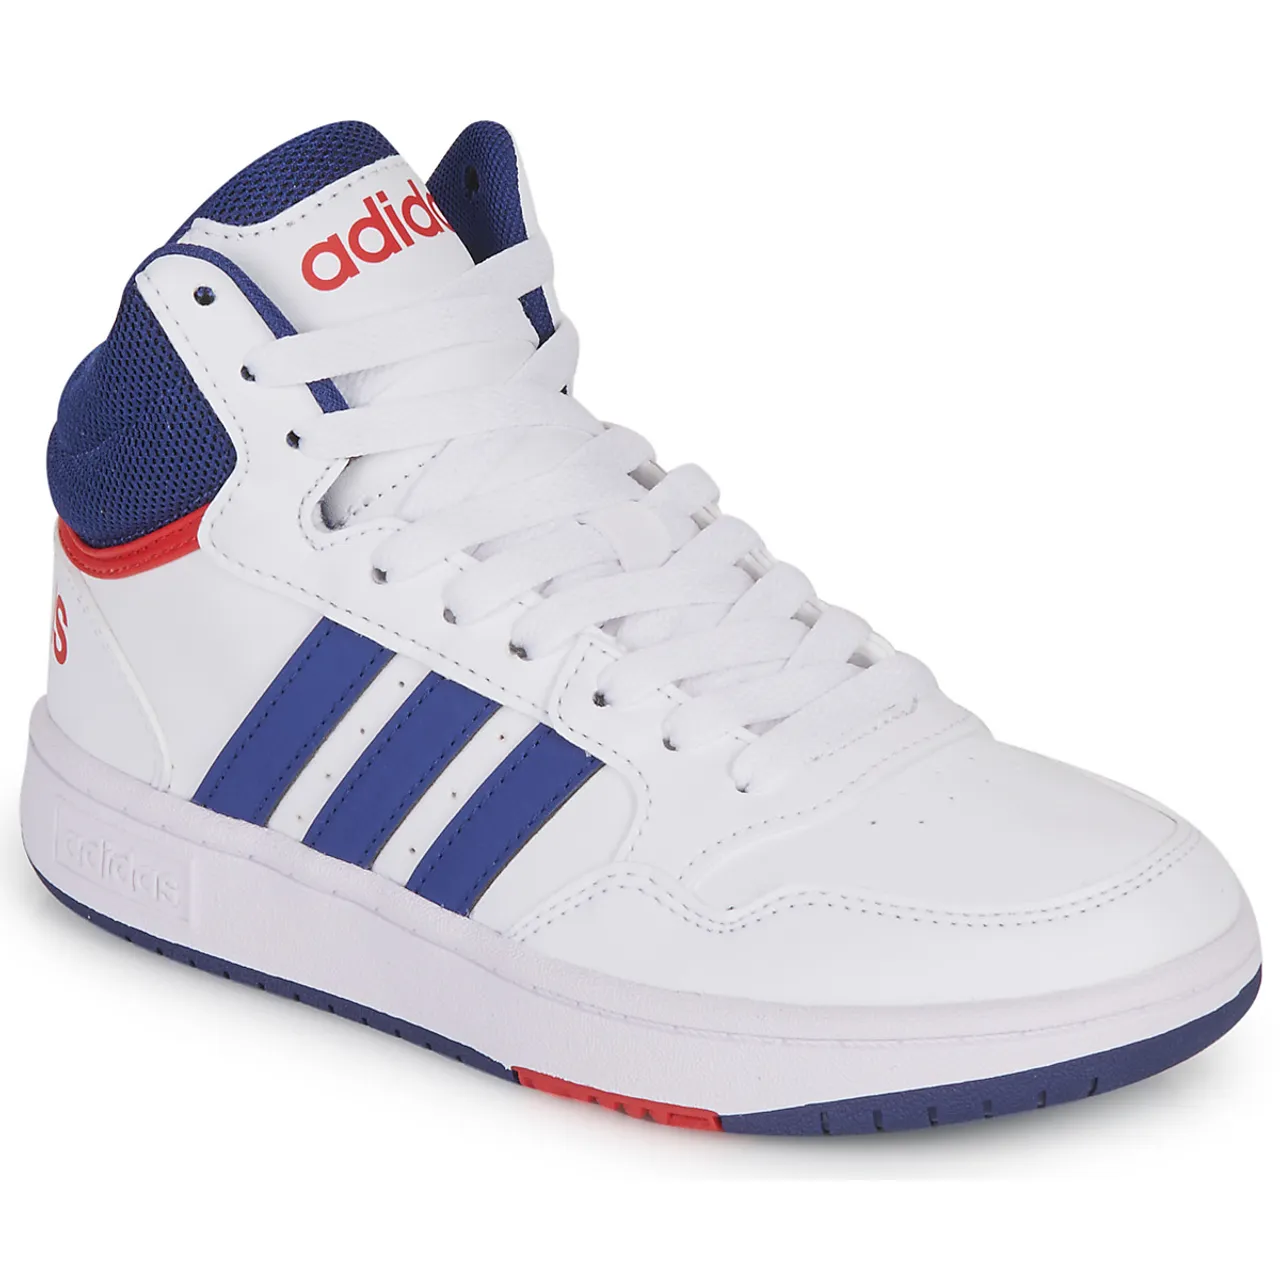 adidas  HOOPS MID 3.0 K  boys's Children's Shoes (High-top Trainers) in White